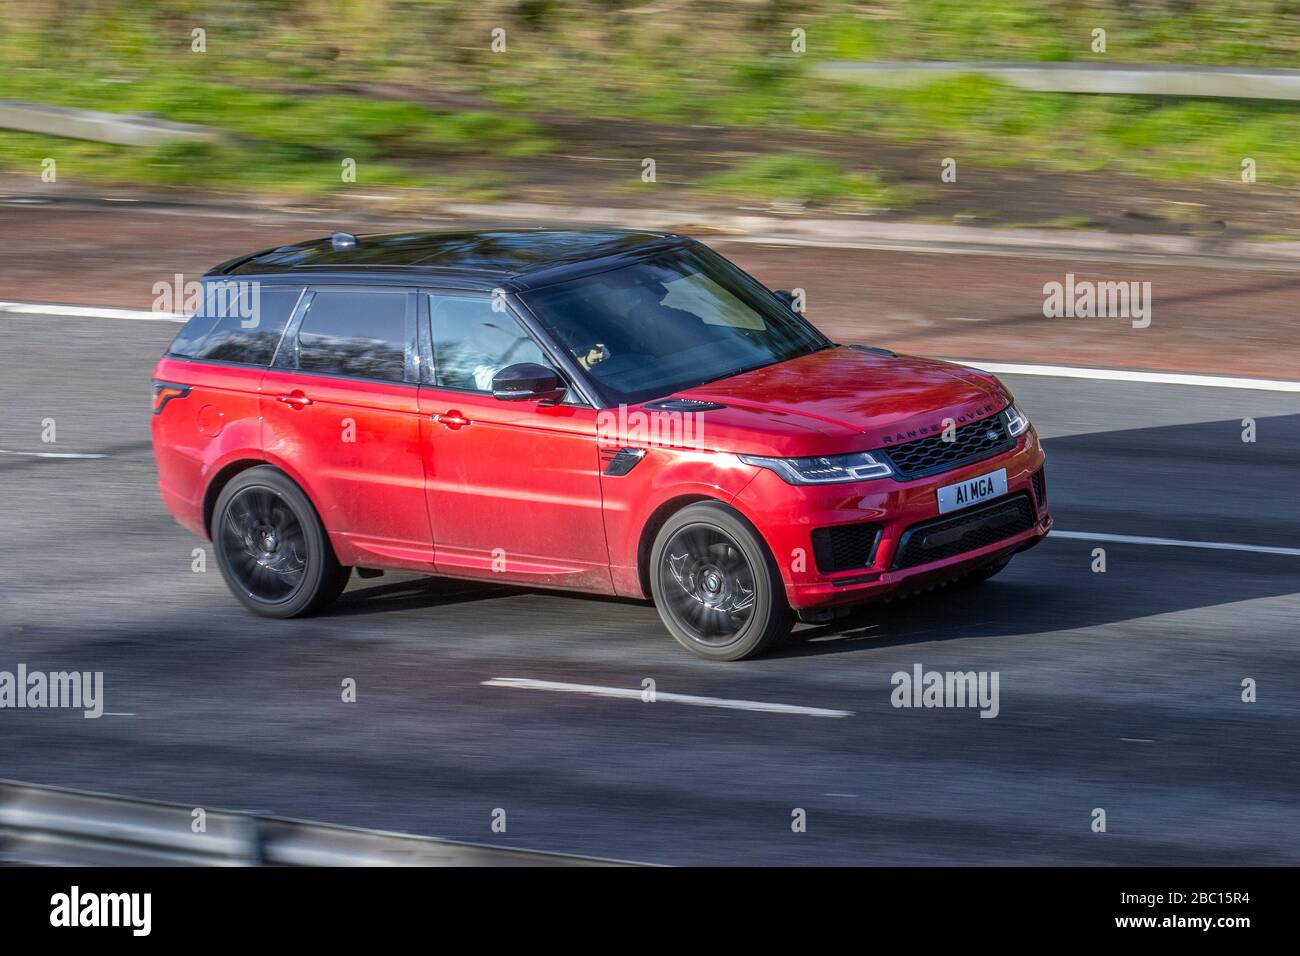 2018 red Land Rover Range Rover Sport HSE DYN SDV with private number plate, personalised, cherished, dateless, DVLA registration marks, registrations;; Vehicular traffic moving vehicles, driving British vehicle on UK roads, motors, motoring on the M6 motorway highway Stock Photo